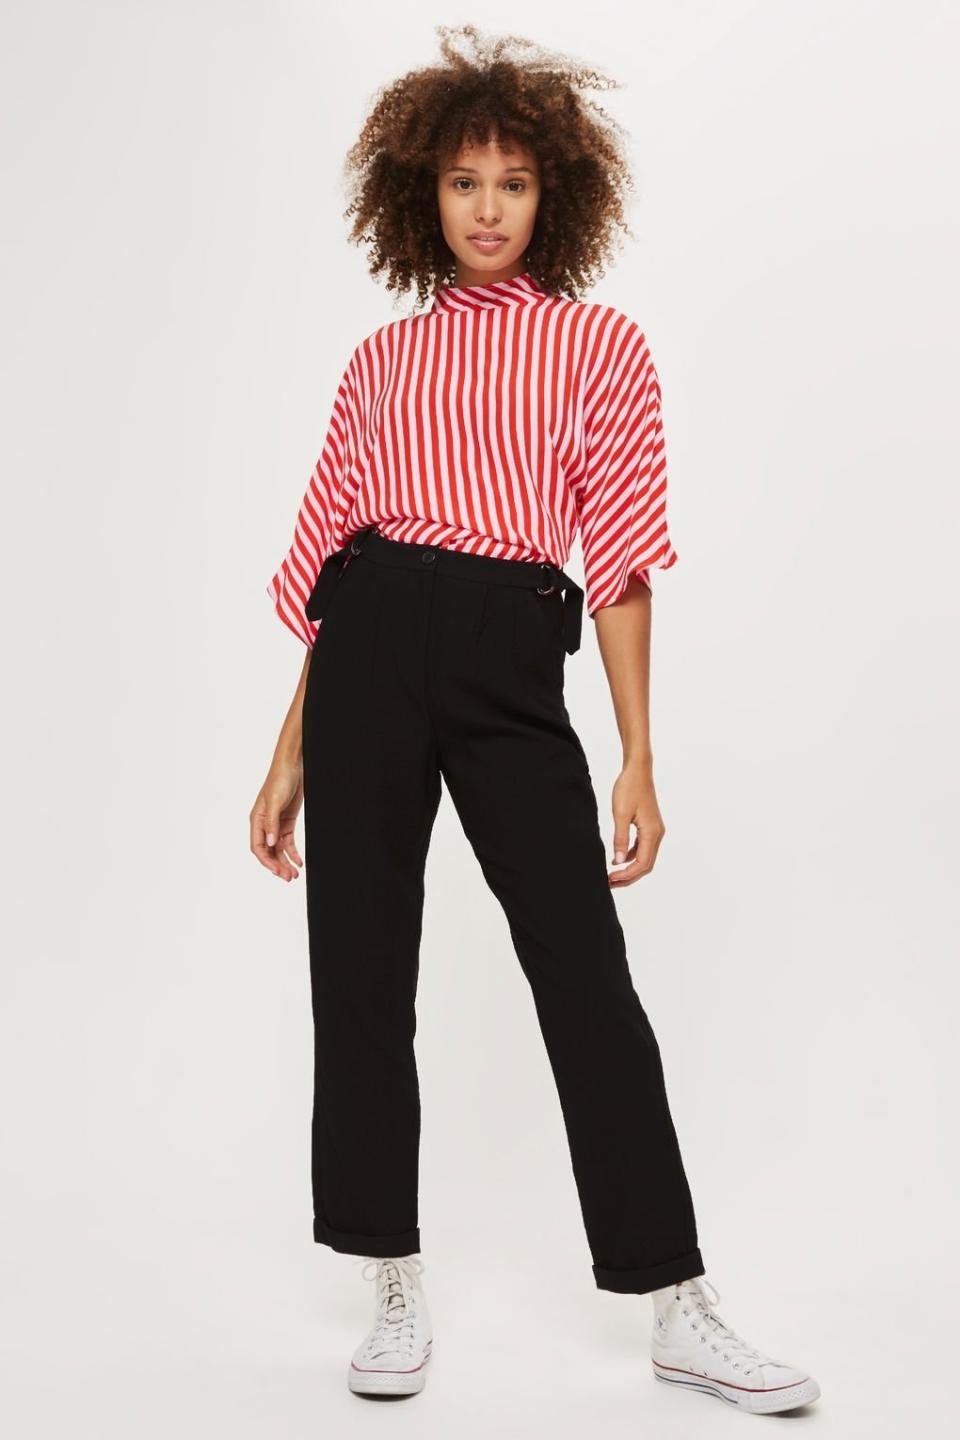 Get them at <a href="http://us.topshop.com/en/tsus/product/high-waisted-mensy-trousers-7326395?bi=0&amp;ps=20&amp;Ntt=high%20waisted%20trousers" target="_blank">Topshop</a>, $68.